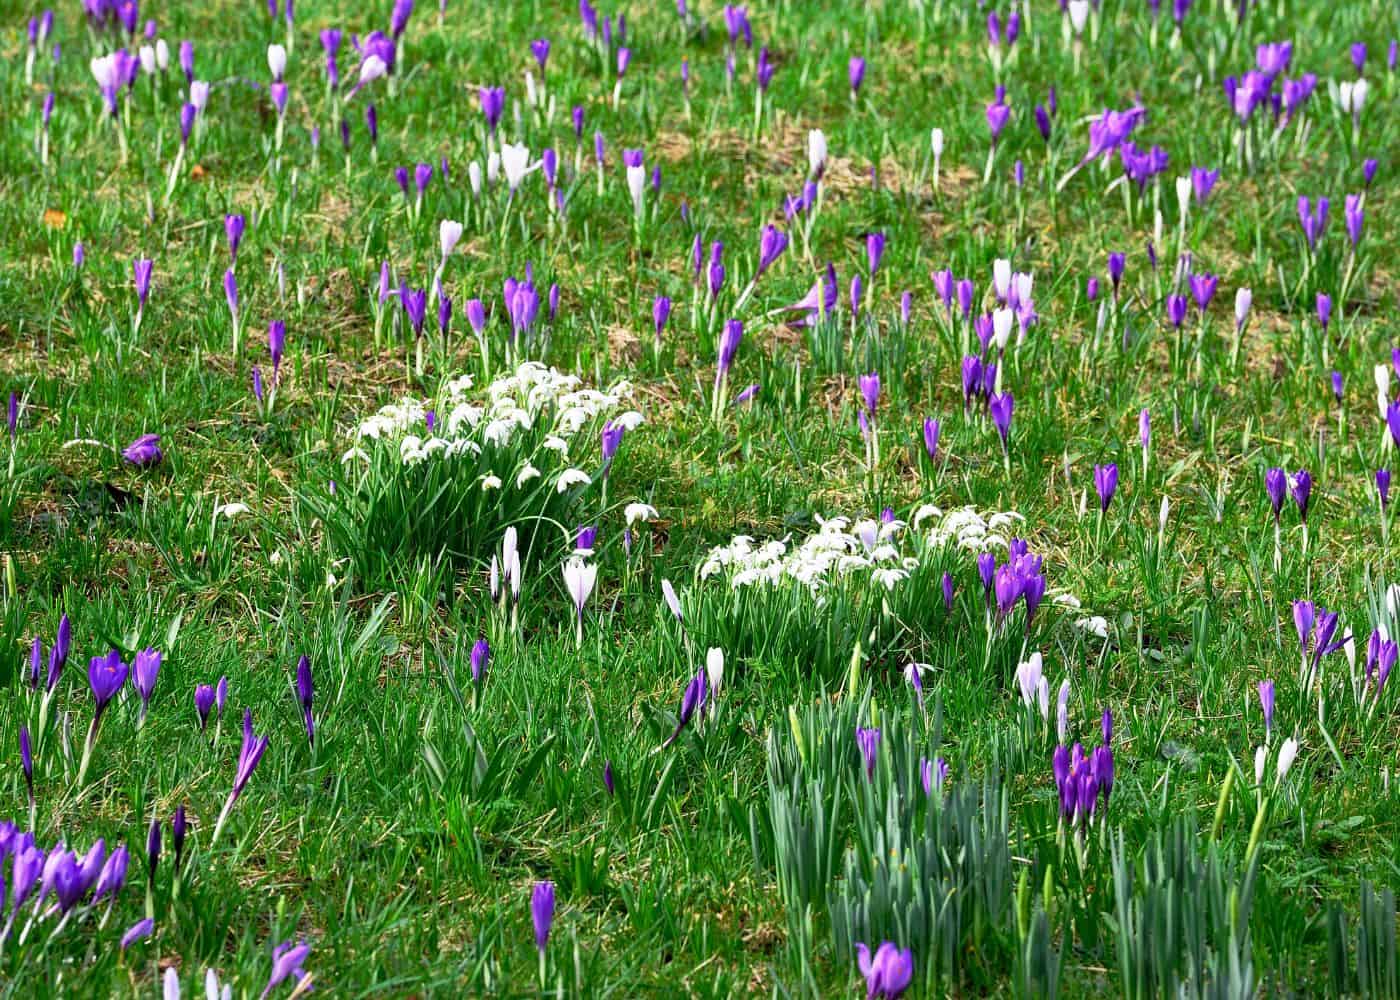 Spring bulbs - snowdrops and crocus